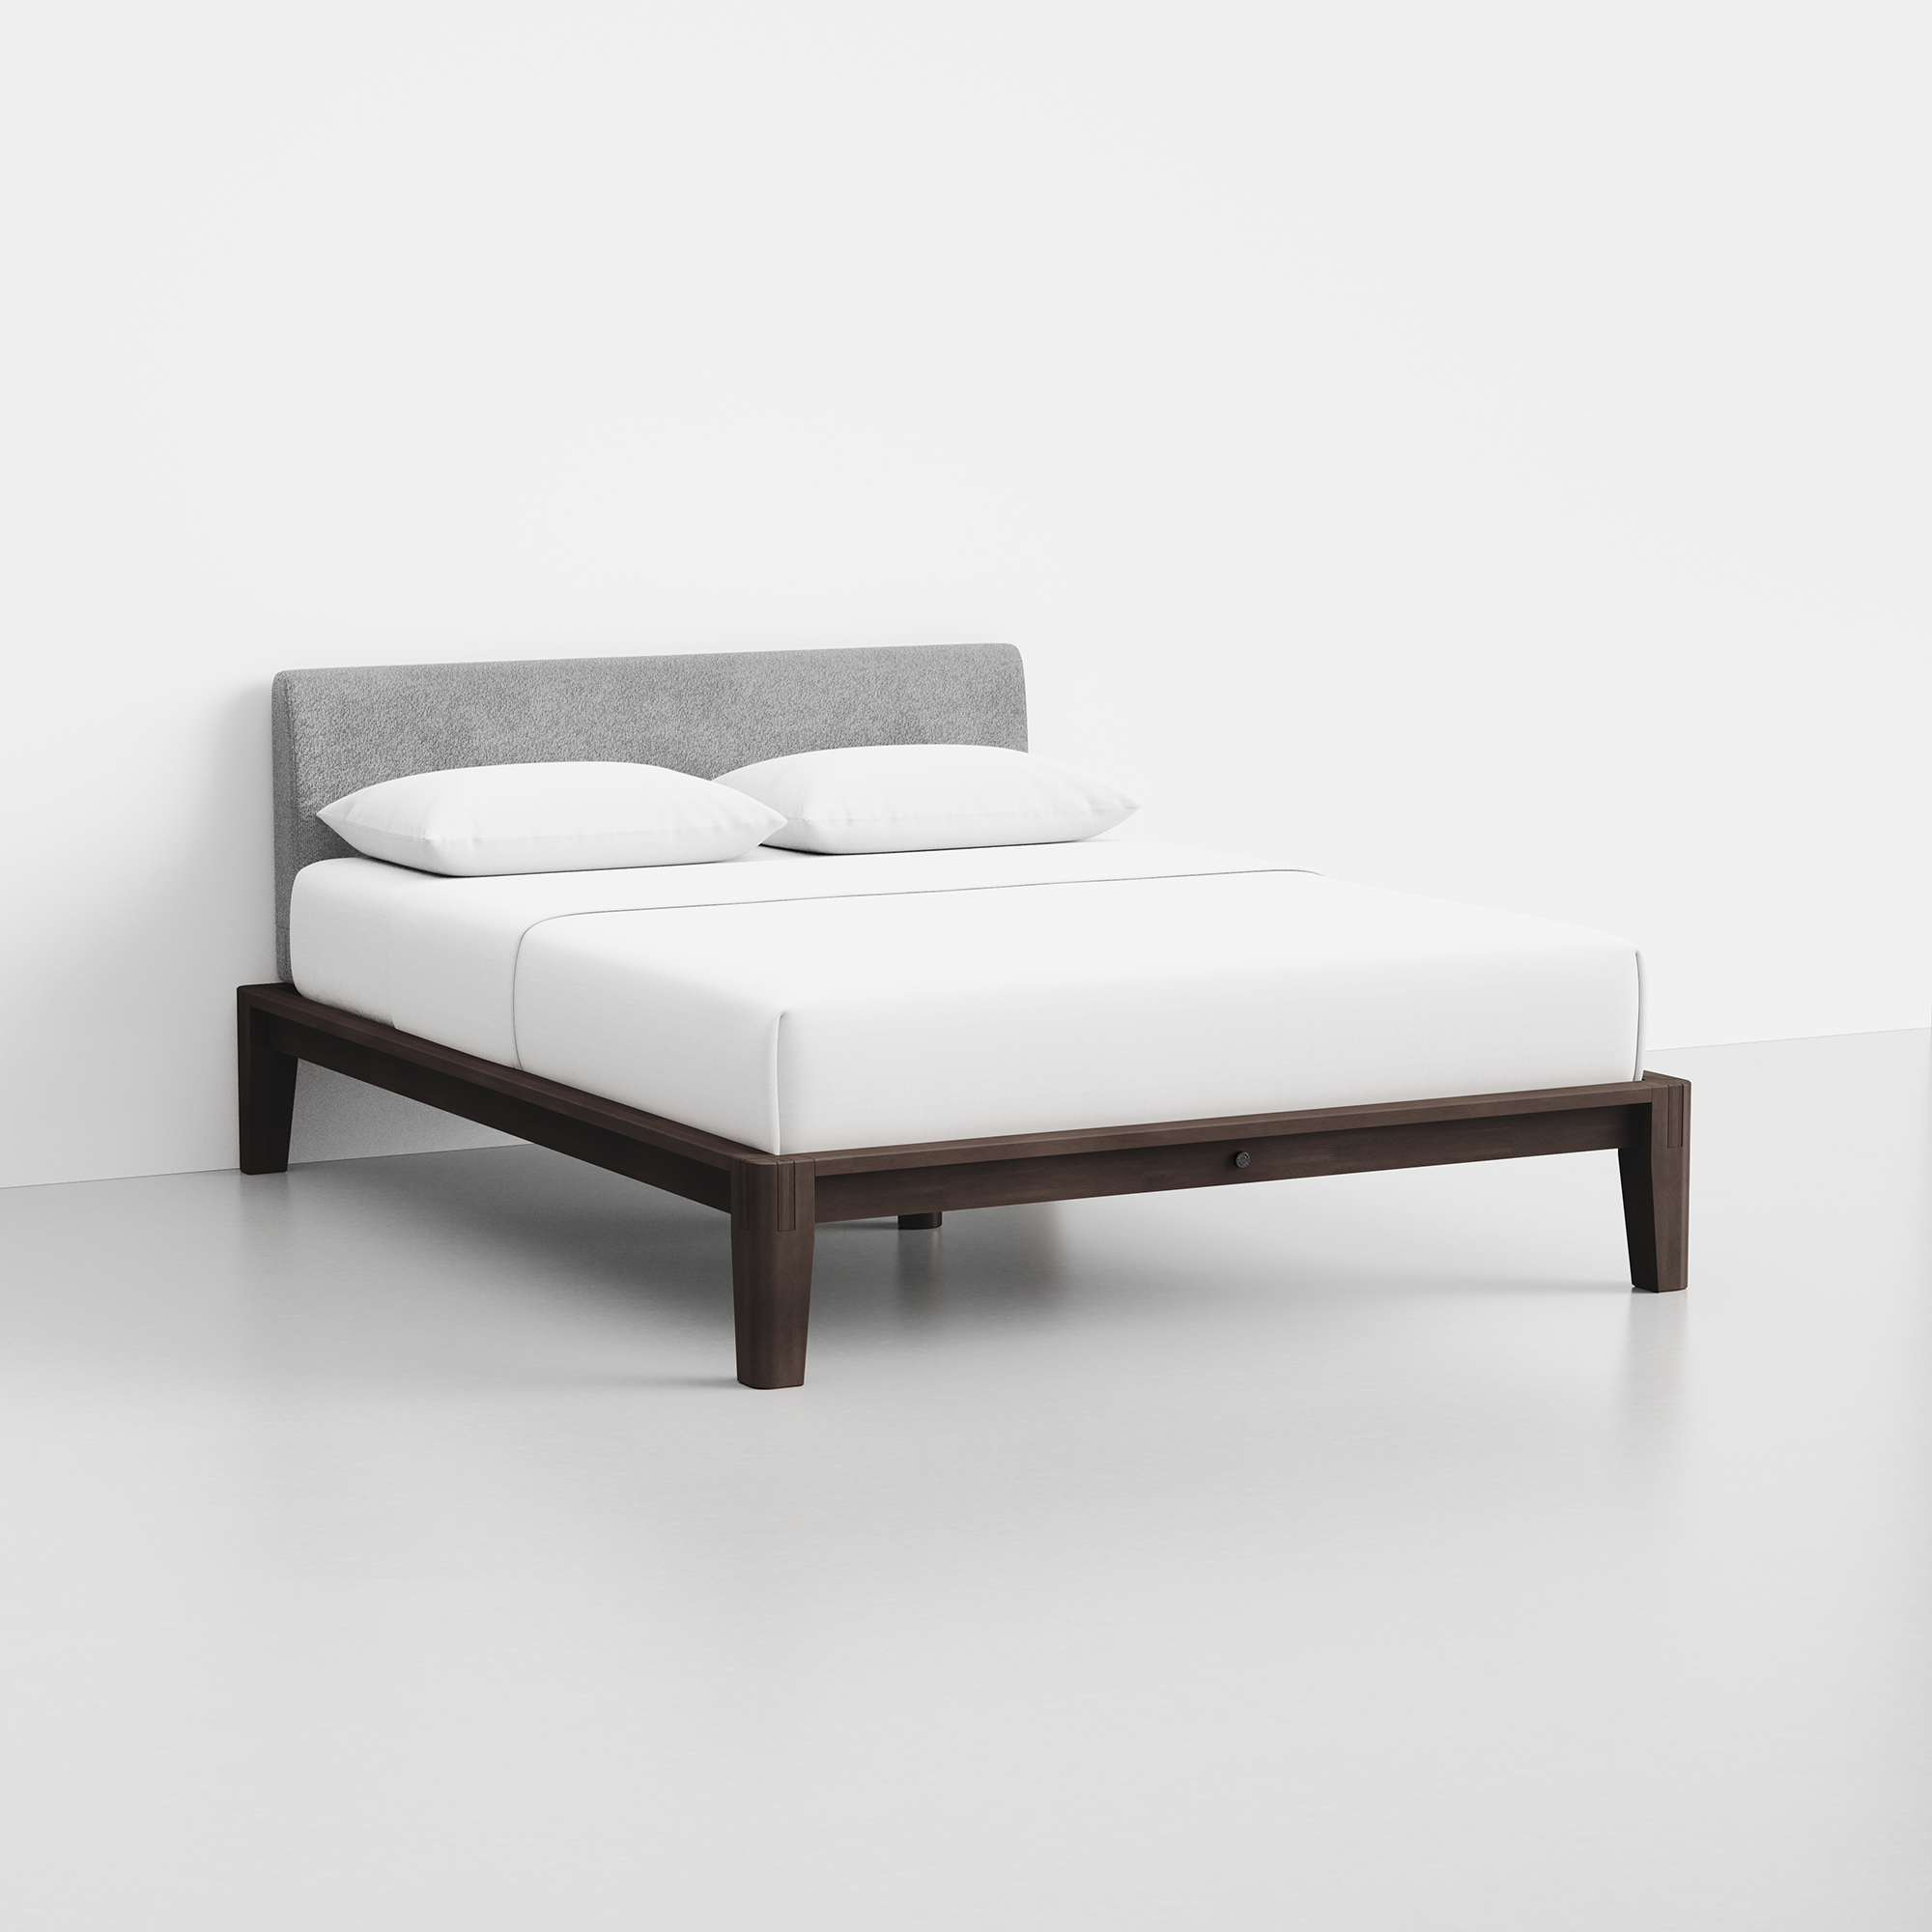 The Bed (Espresso / Pewter) - Render - Angled